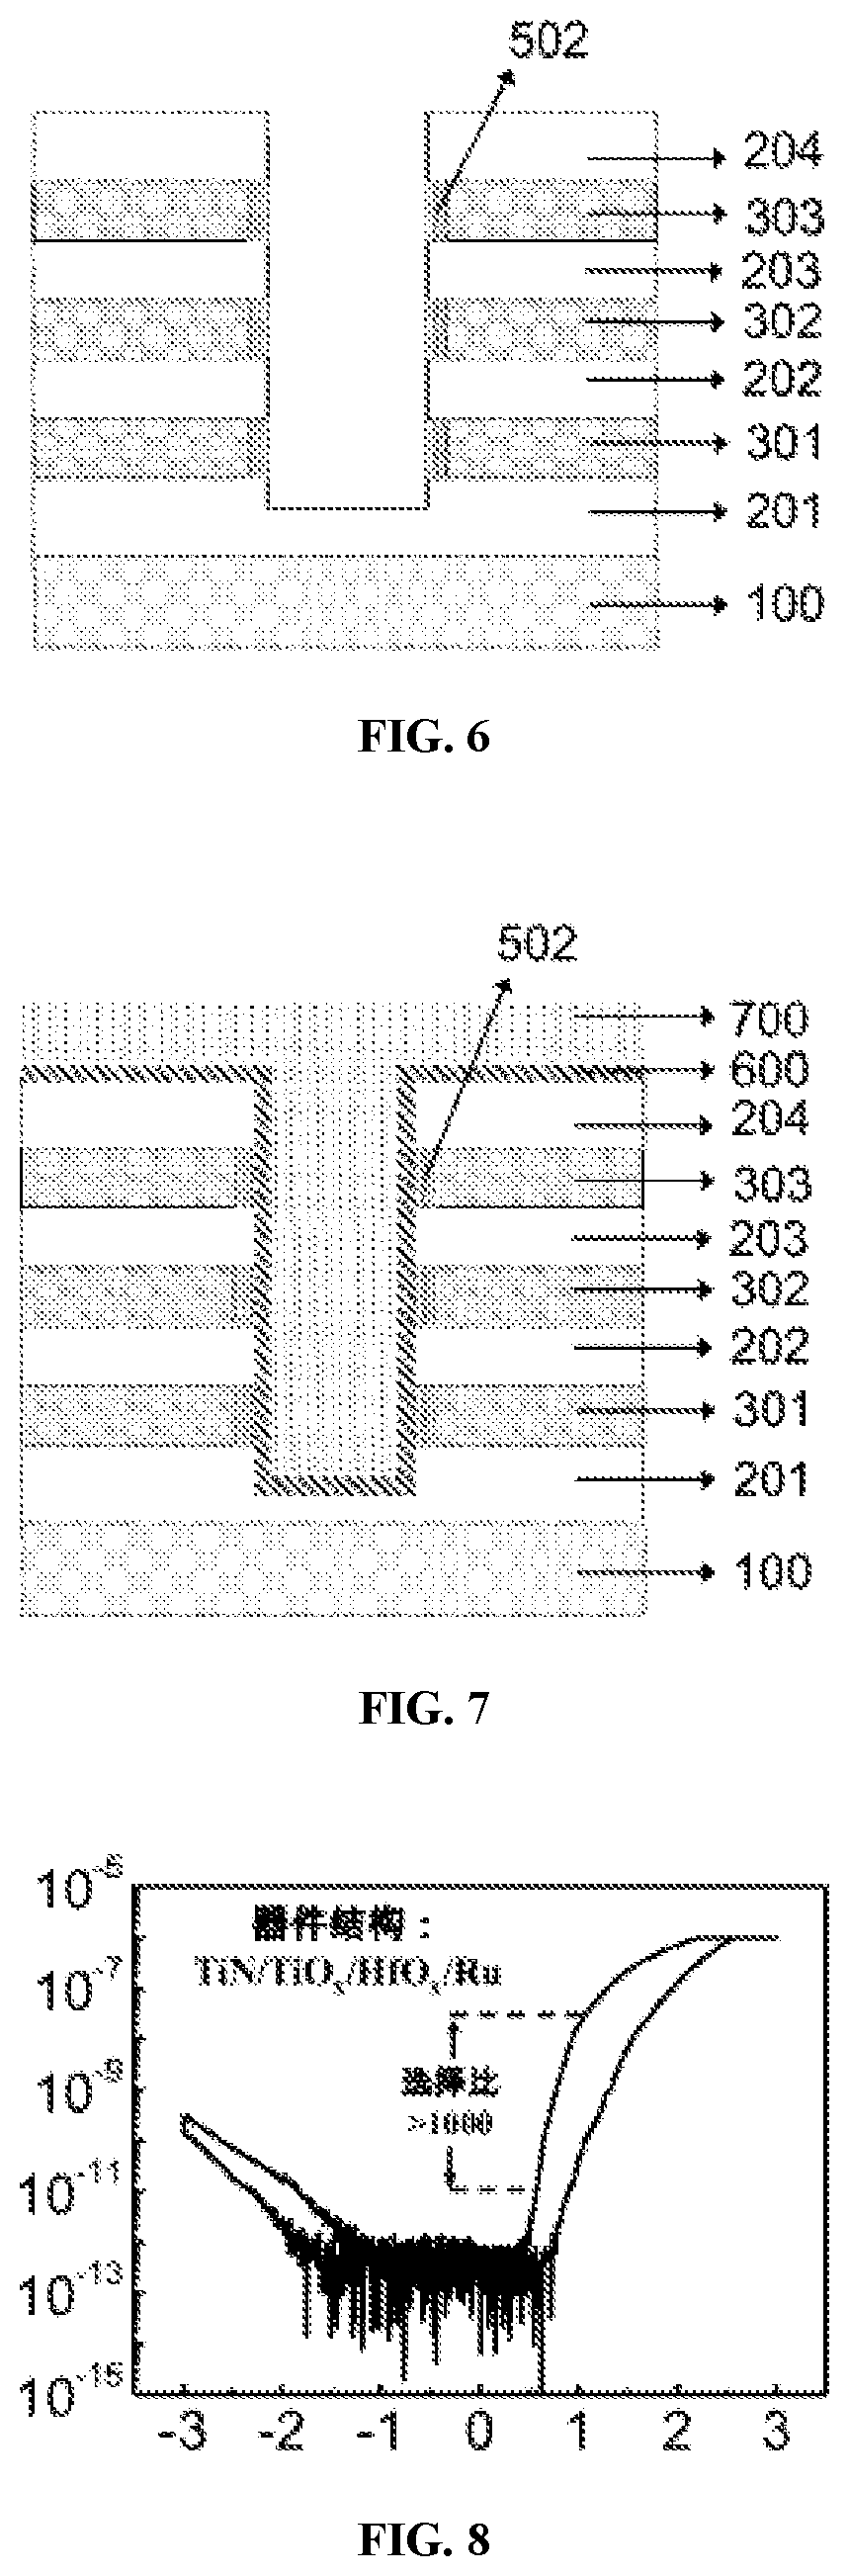 Self-gating resistive storage device having resistance transition layer in vertical trench in stacked structure of insulating dielectric layers and electrodes